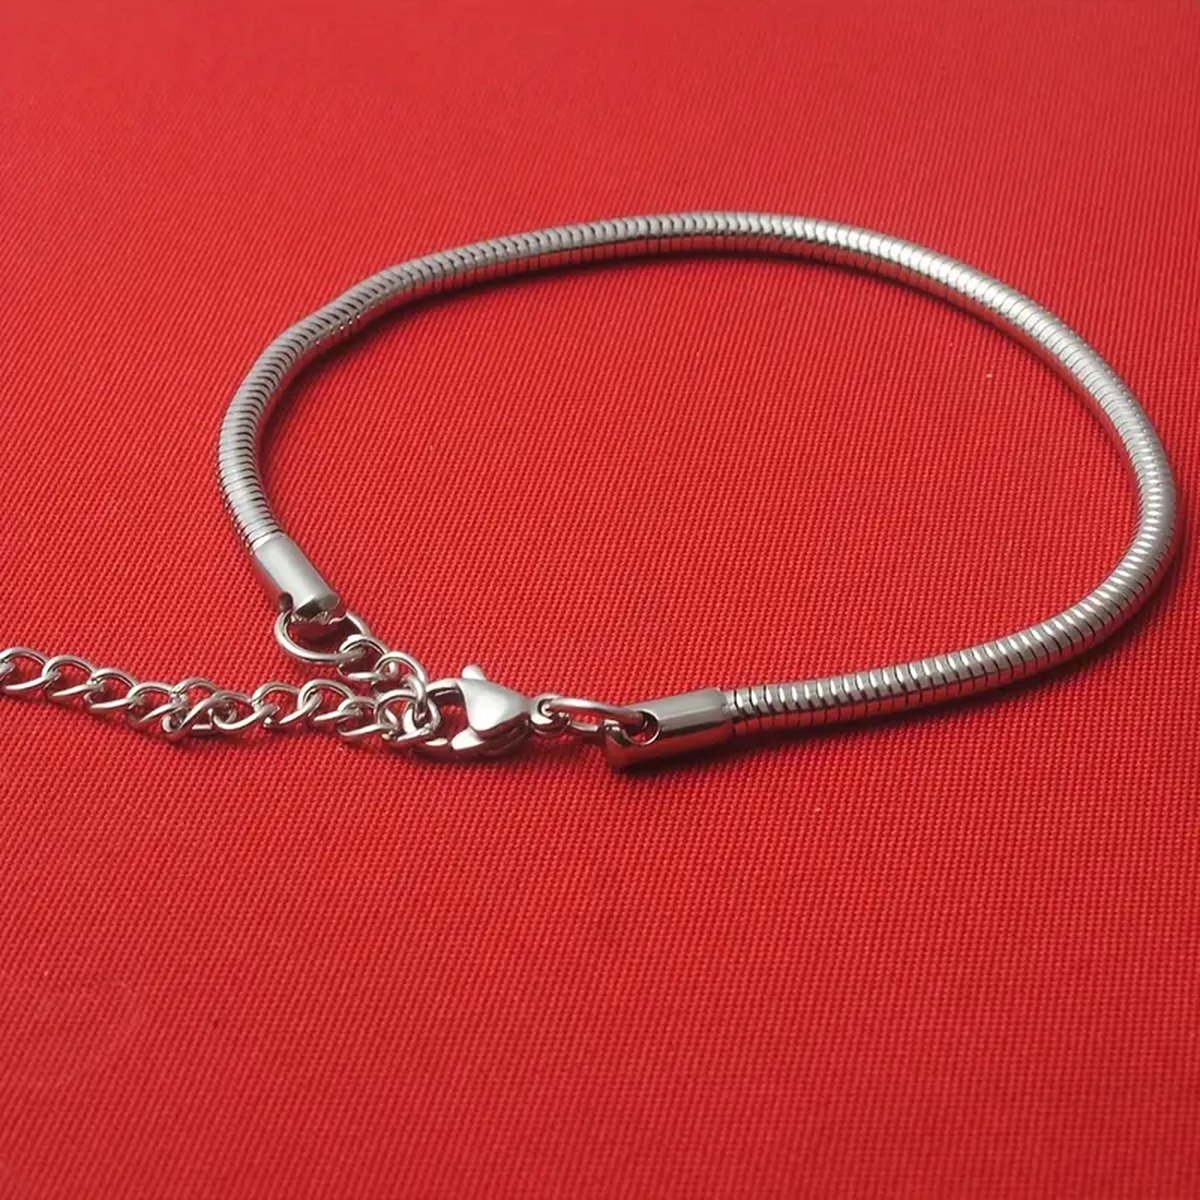 Silver Plated Snake Chain Arm Bracelet